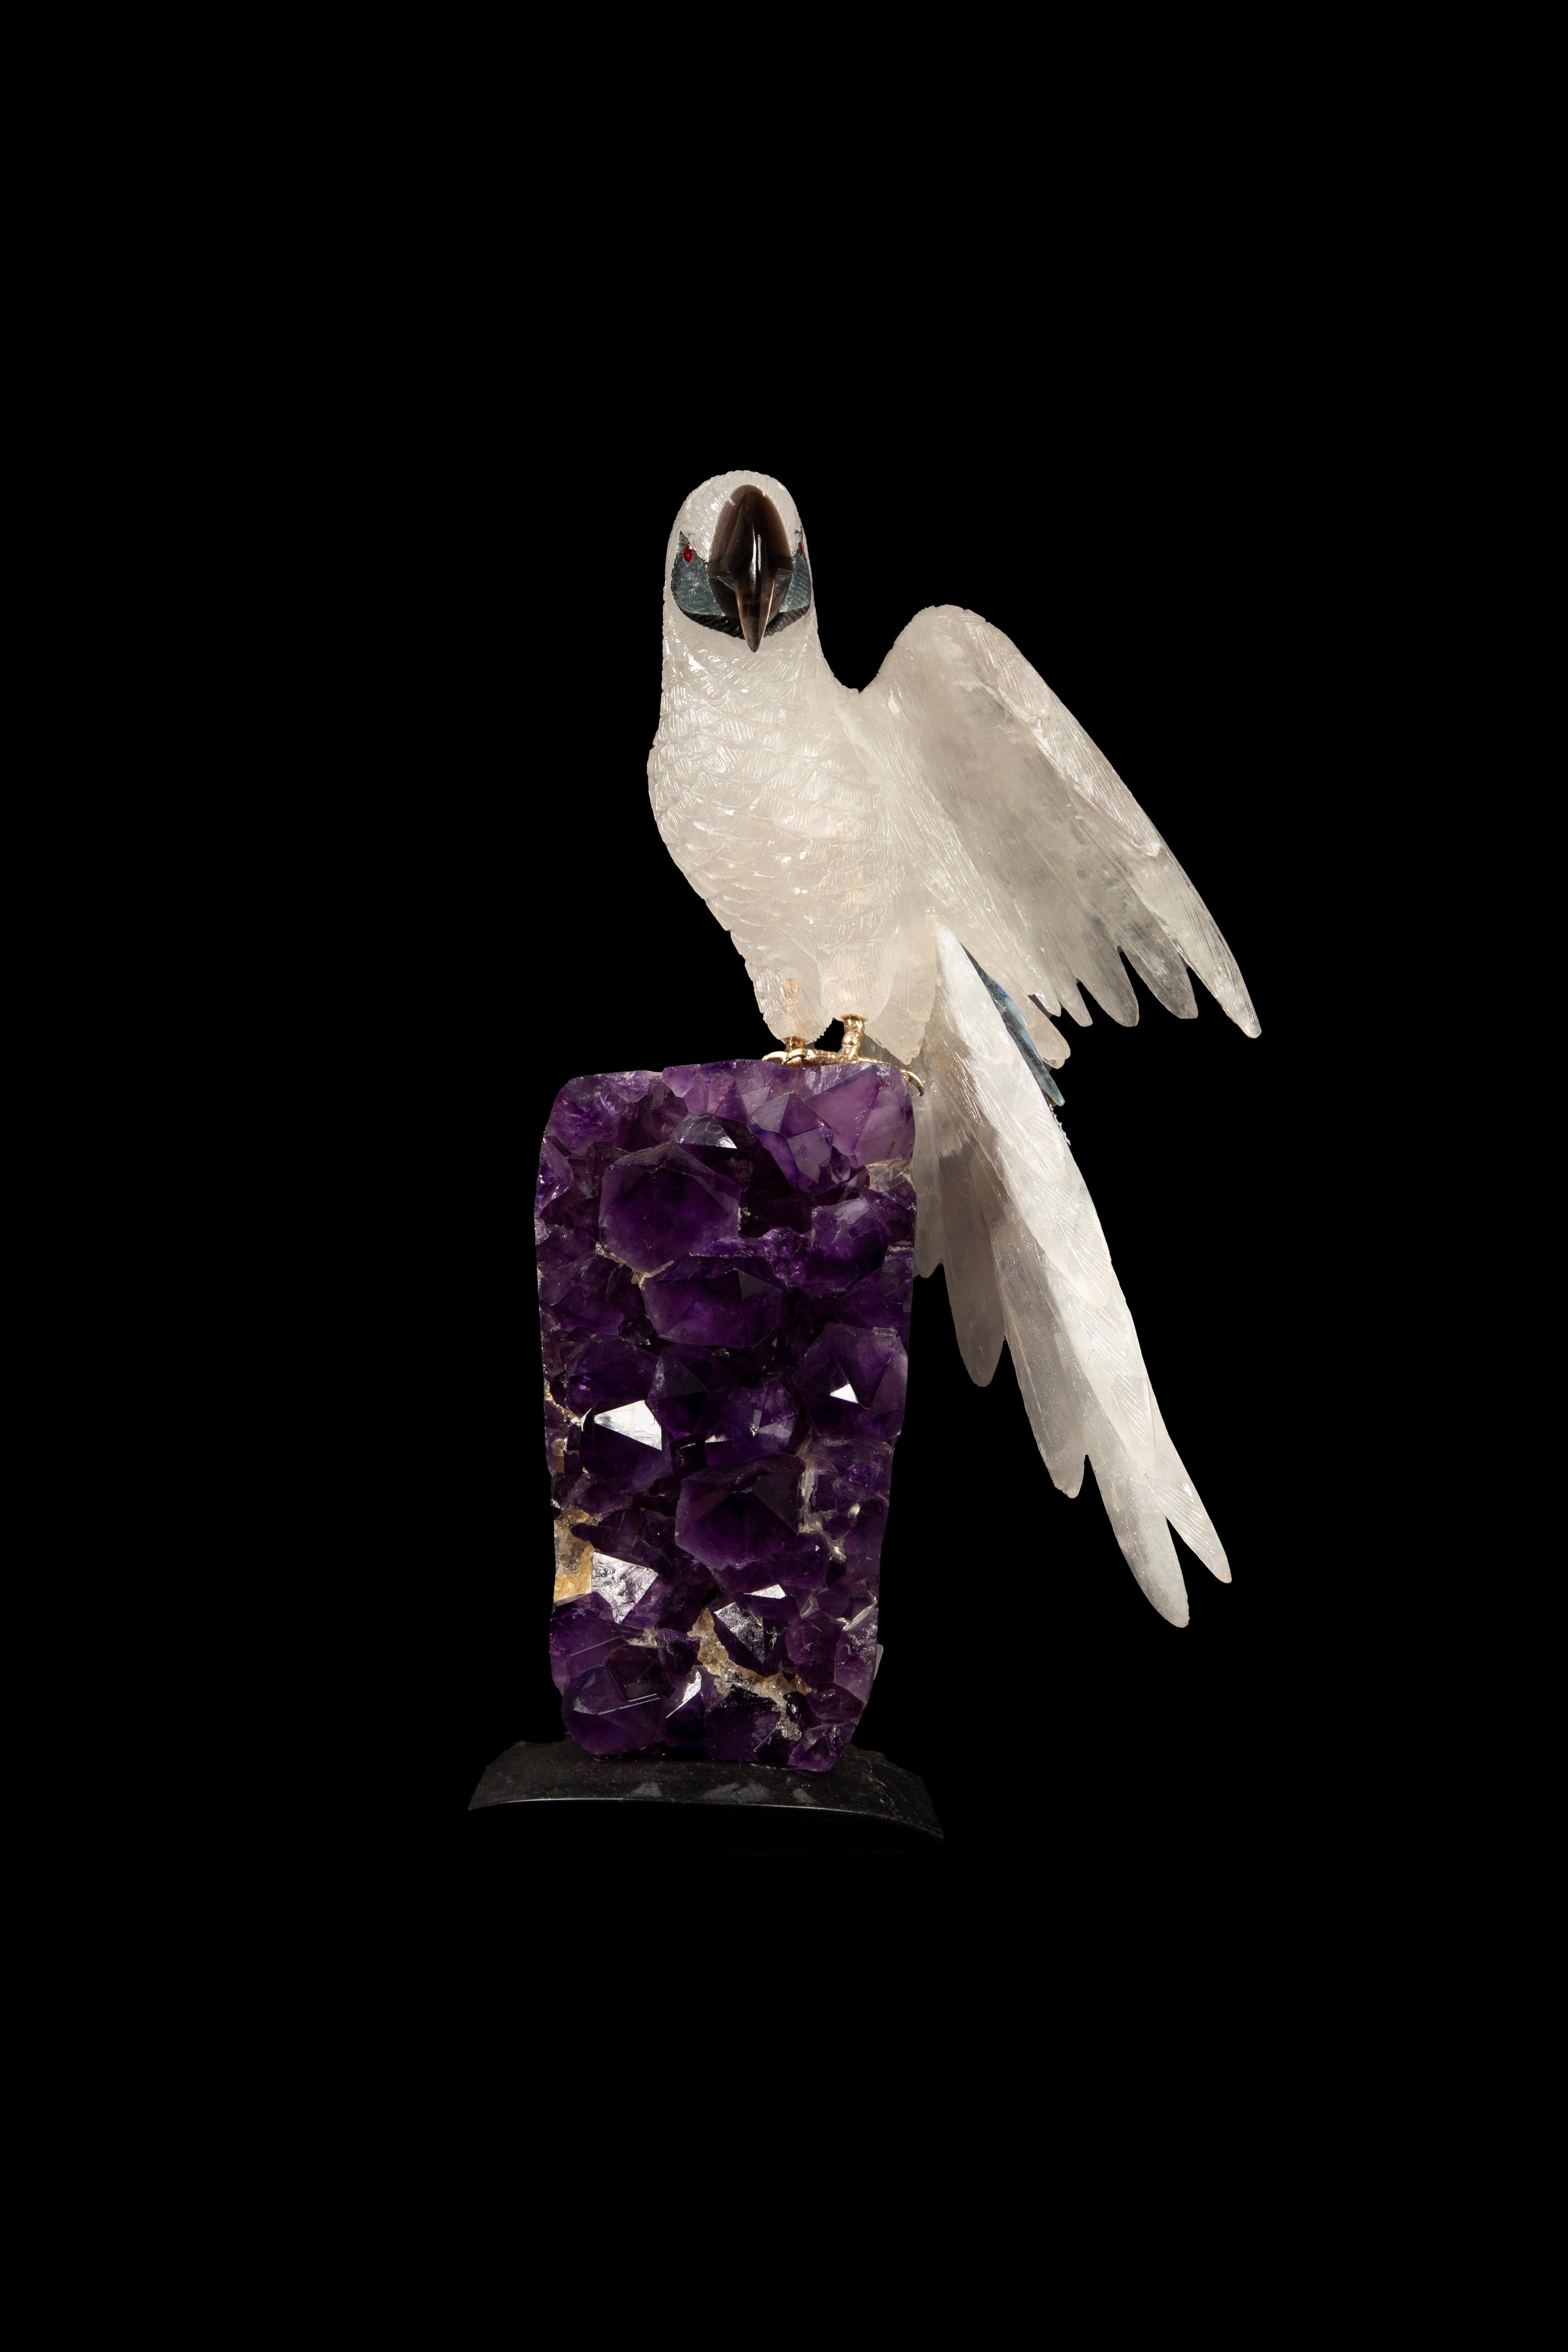 This exquisite 13-inch high carved rock crystal parrot, meticulously handcrafted in Argentina, presents a stunning depiction of artisanal craftsmanship. Perched atop a vibrant amethyst cluster, the sculpture captures the essence of natural beauty